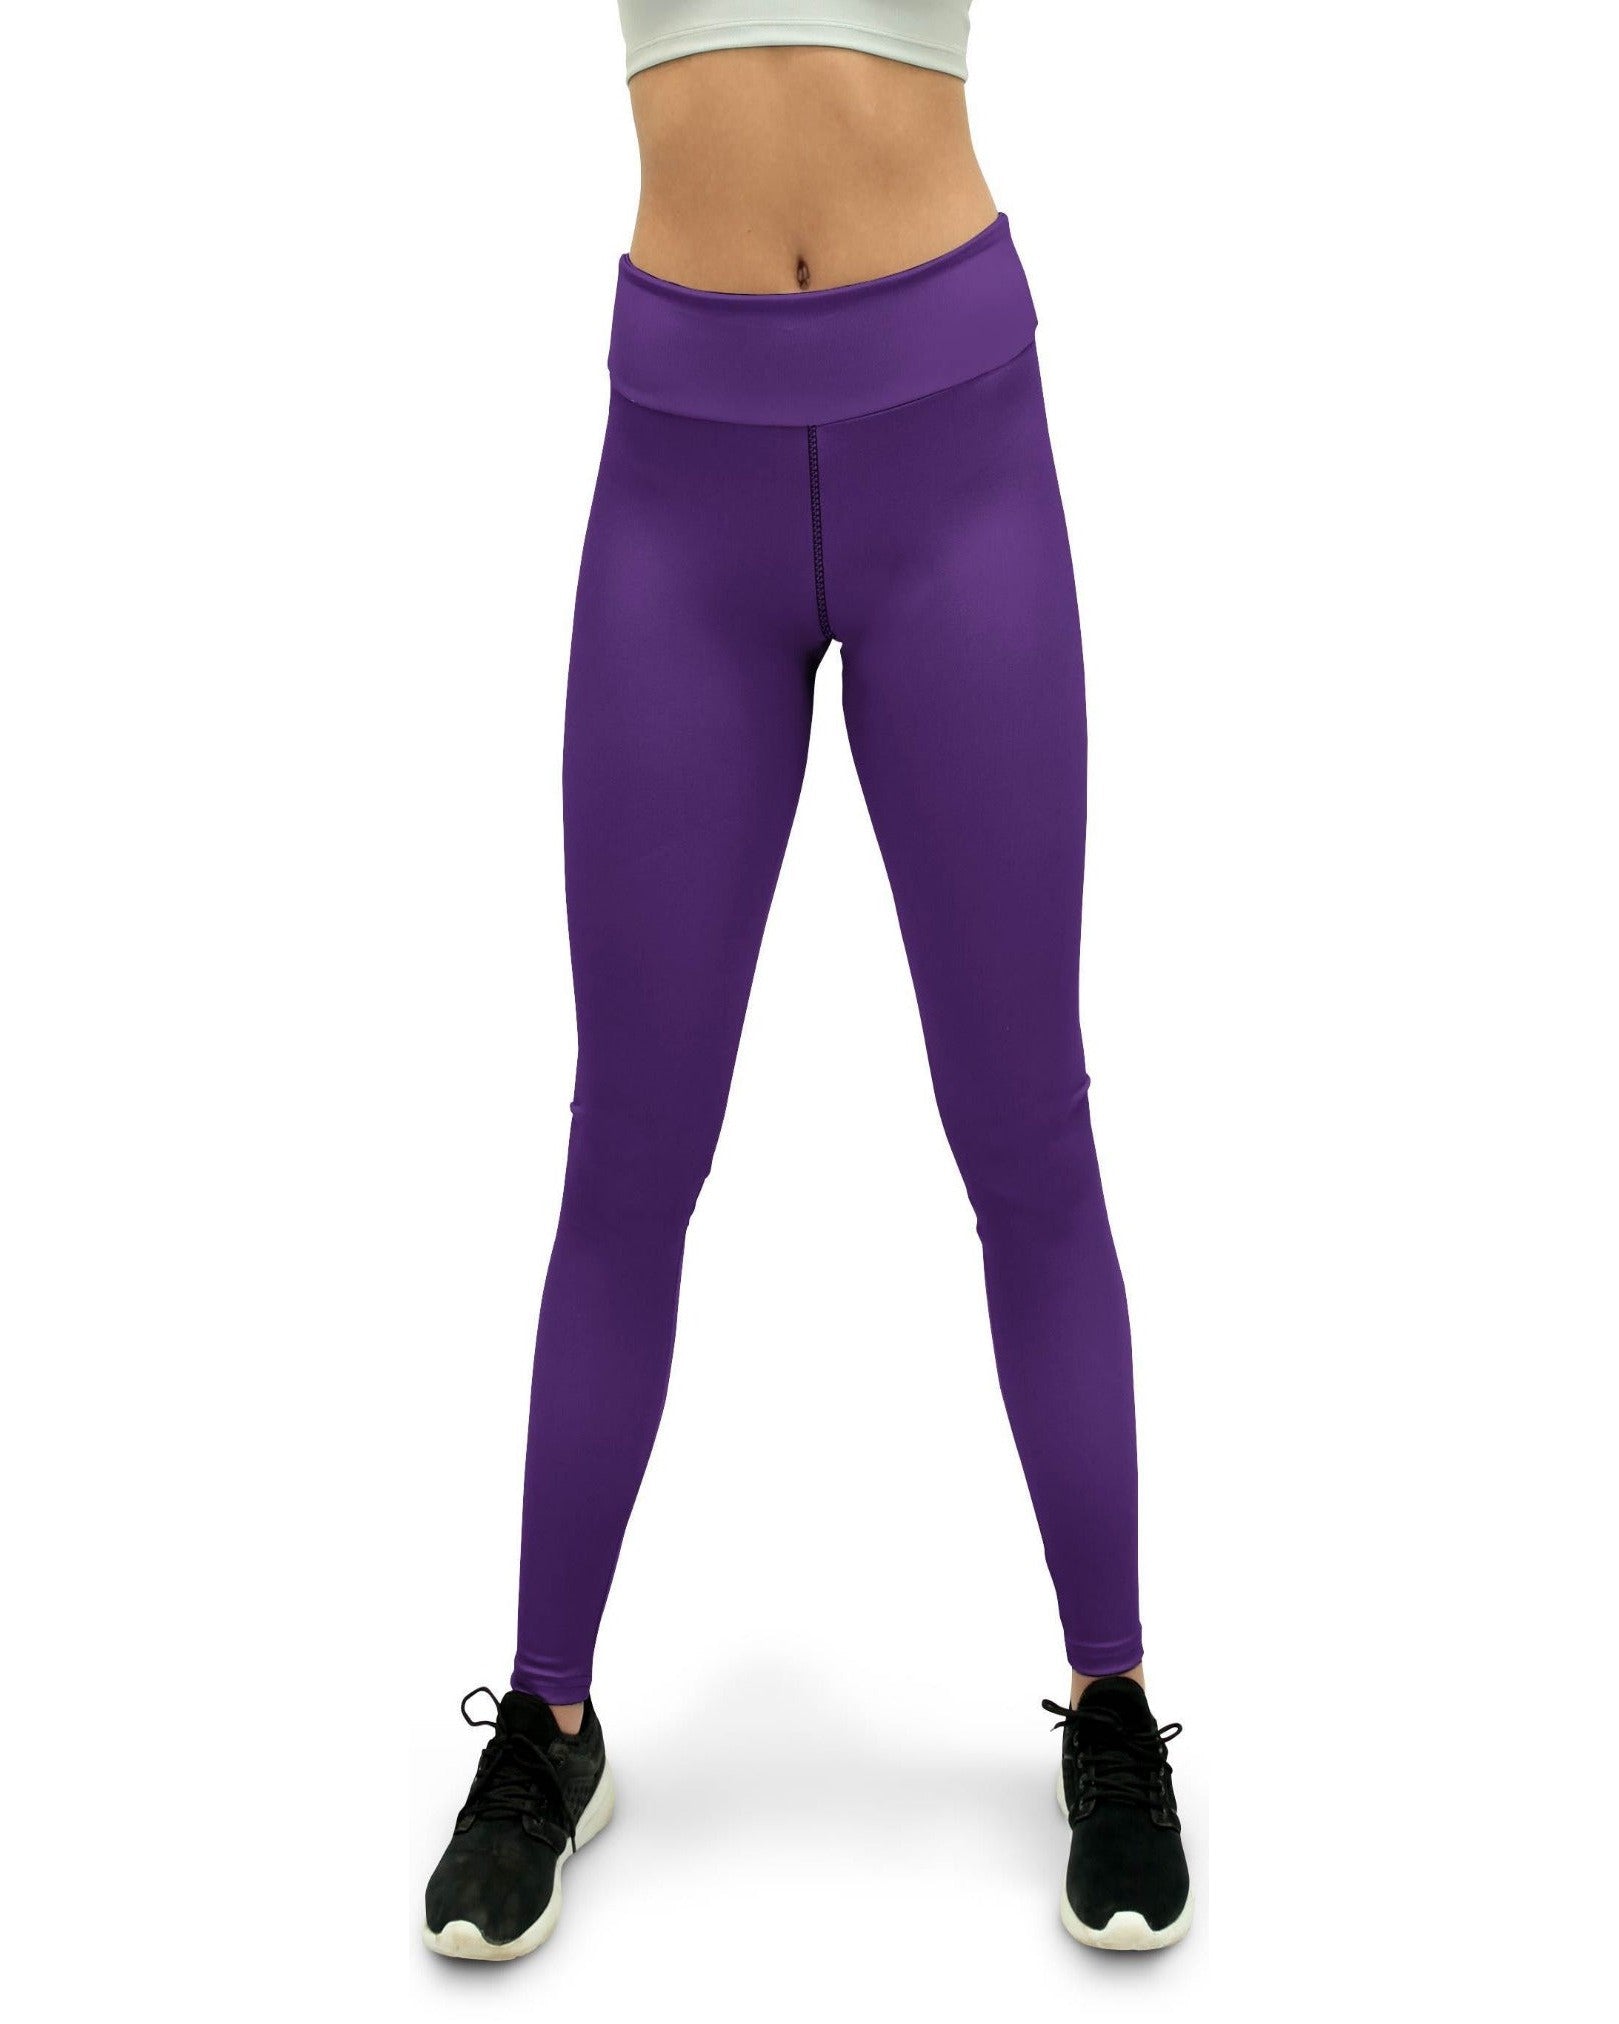 Simple Purple Workout Pants for Push Pull Legs